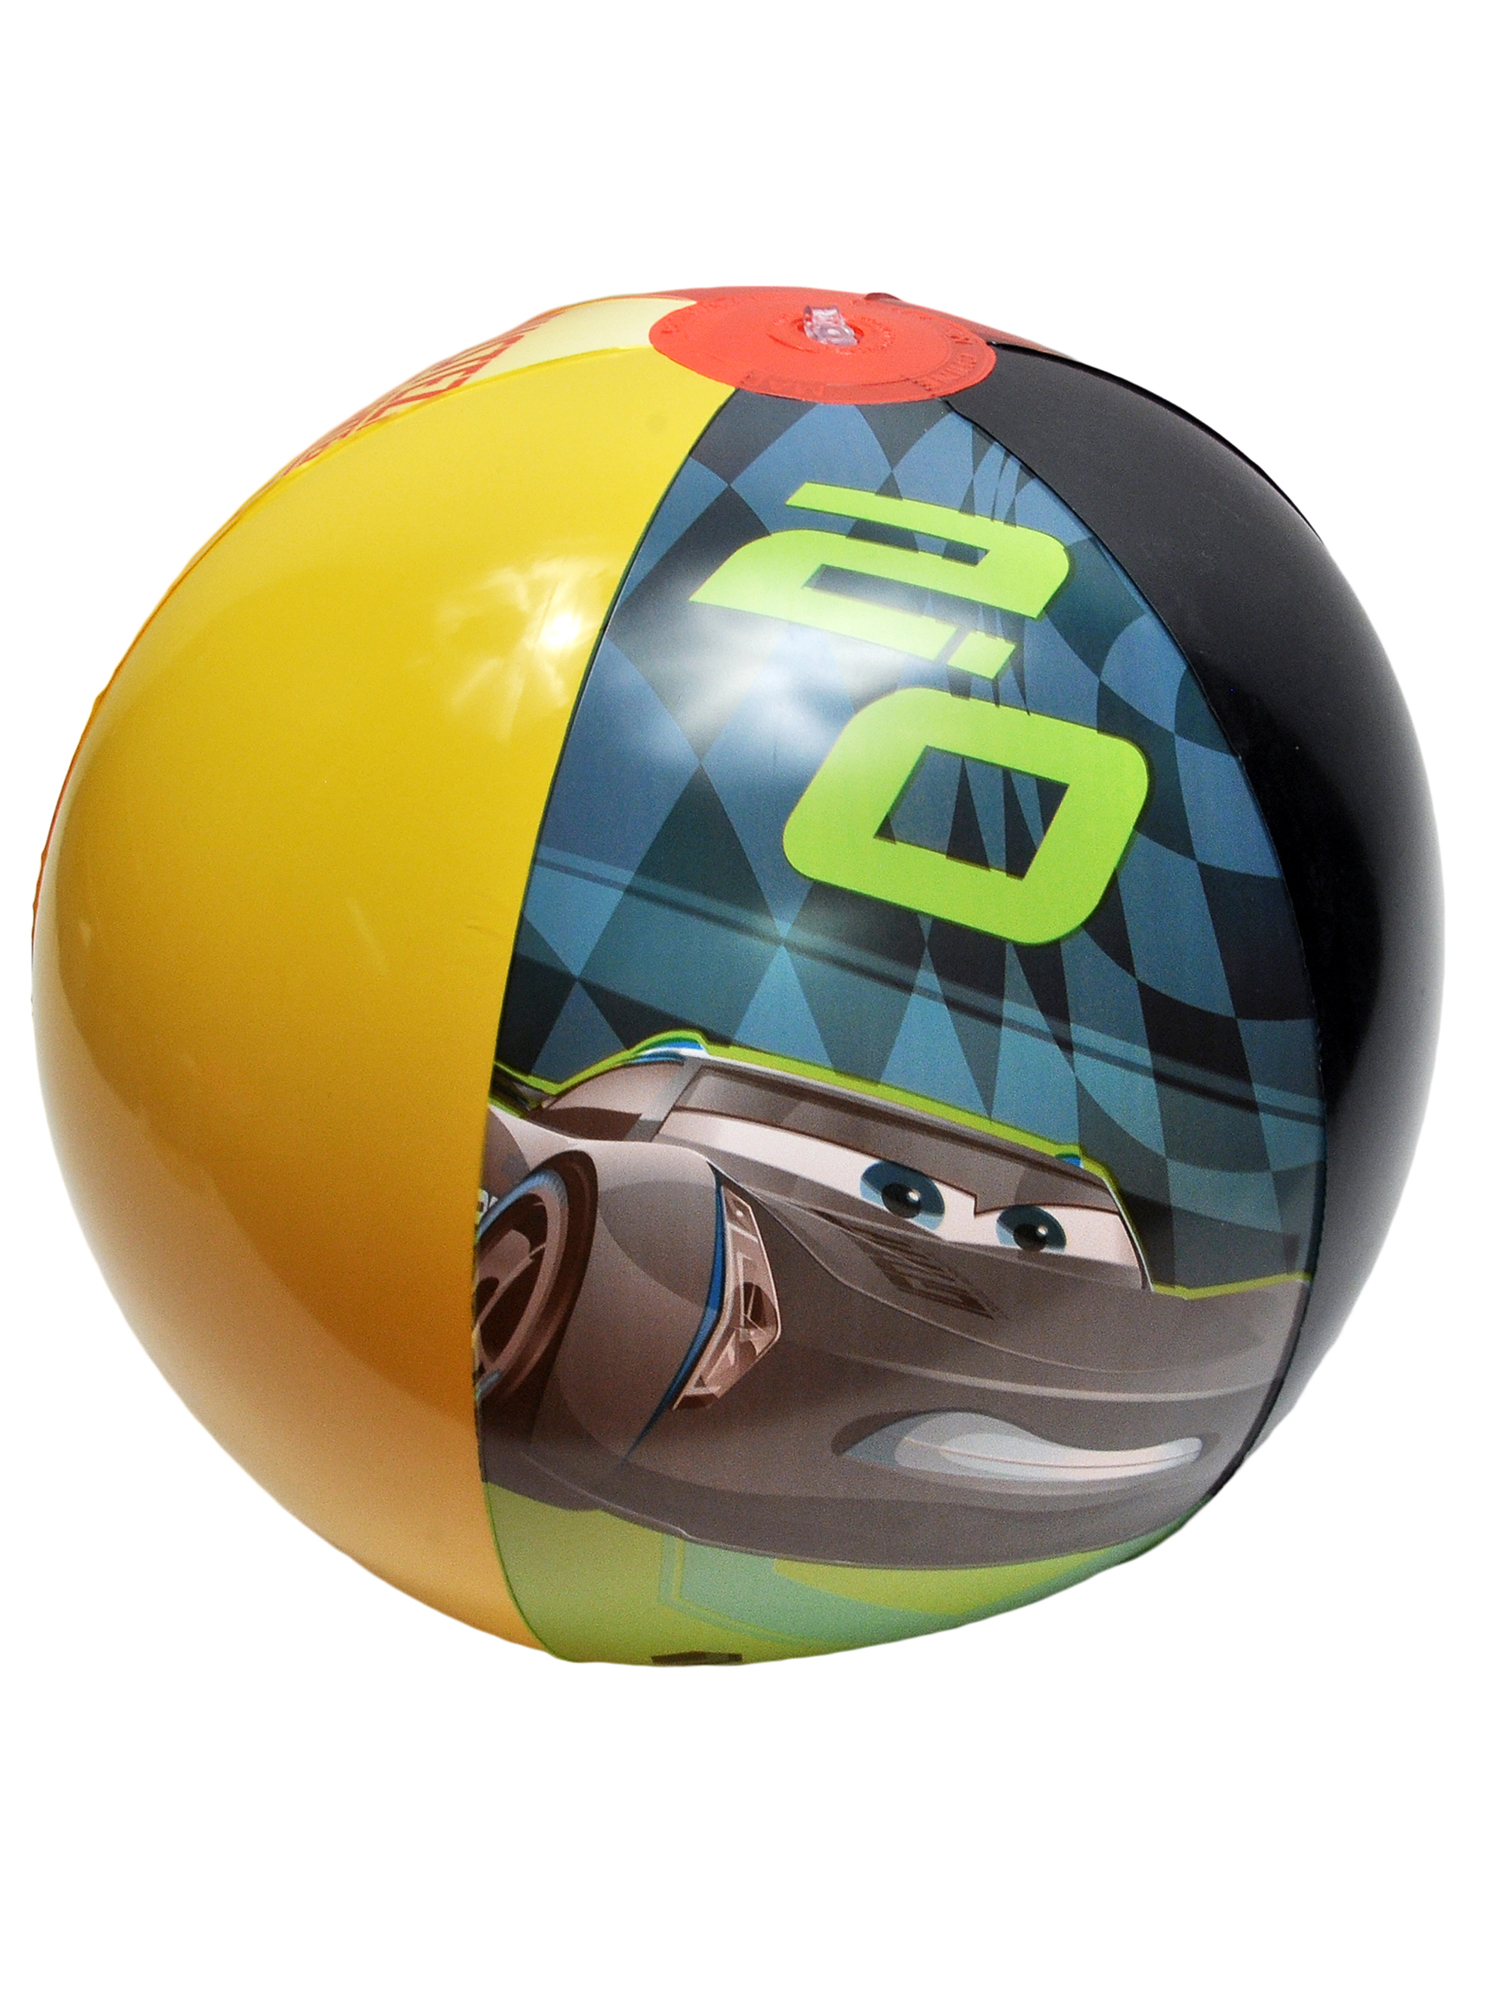 DDI 2322057 Disney Cars 3 Inflatable Beach Ball - 180 Per Pack - Case of 180 - image 2 of 4